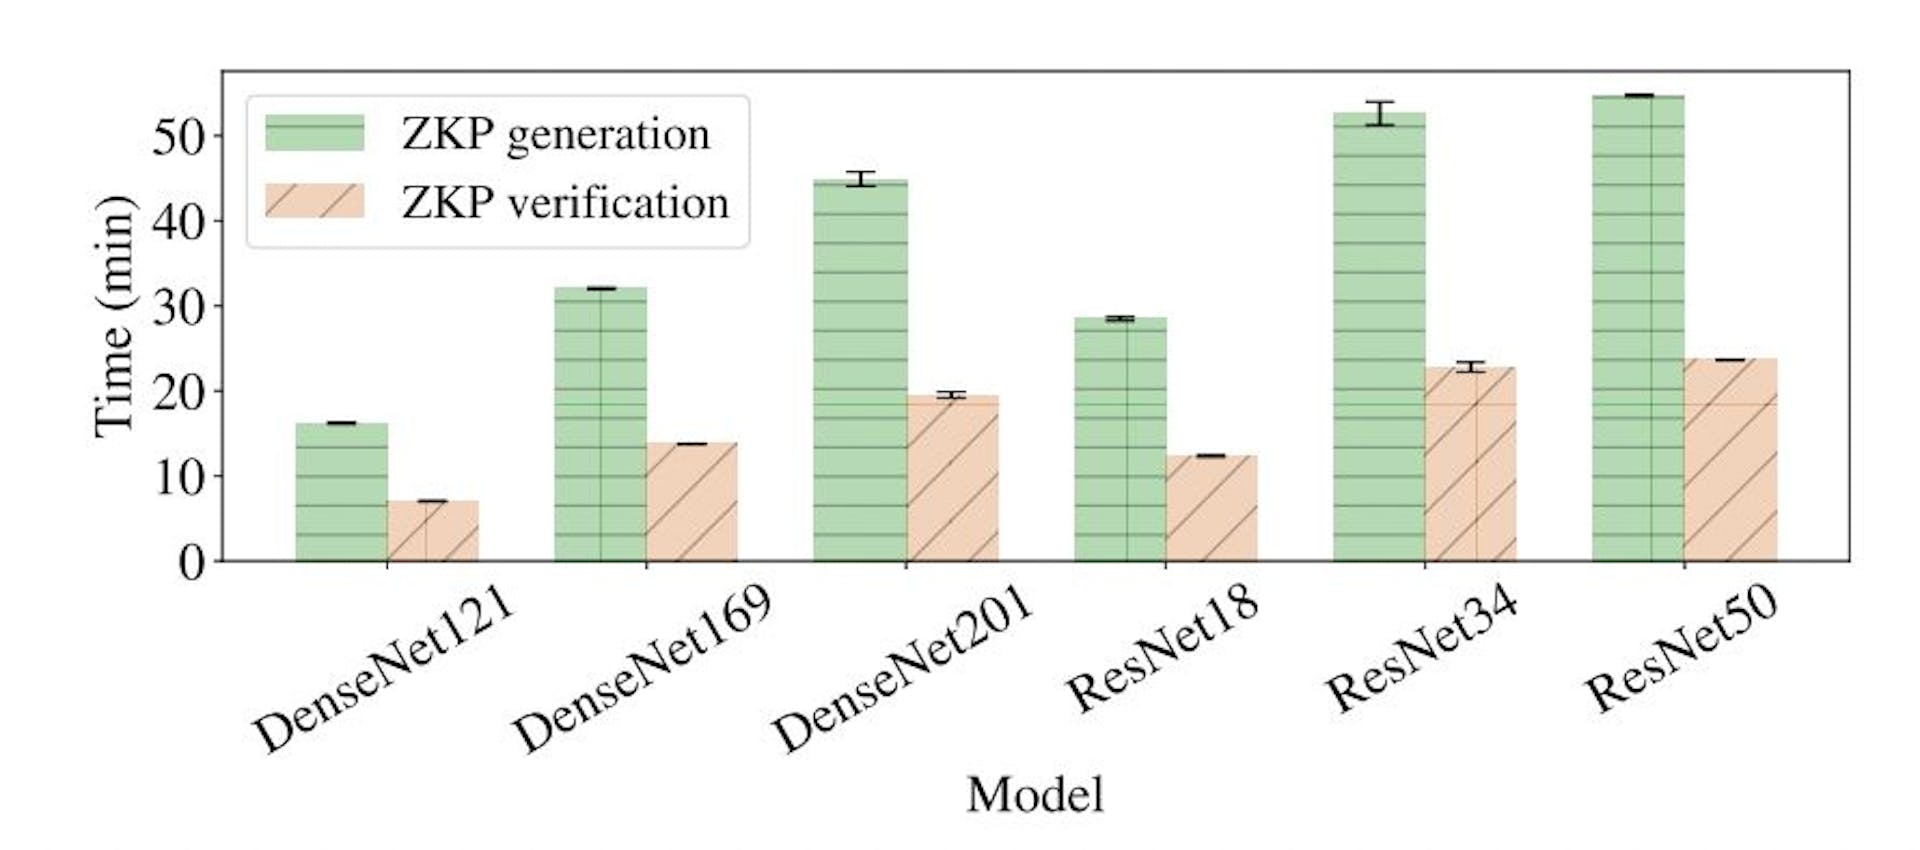 Fig. 9: Halo2 ZKP proof generation and verification time for a zkFL system withvarious network backbones.